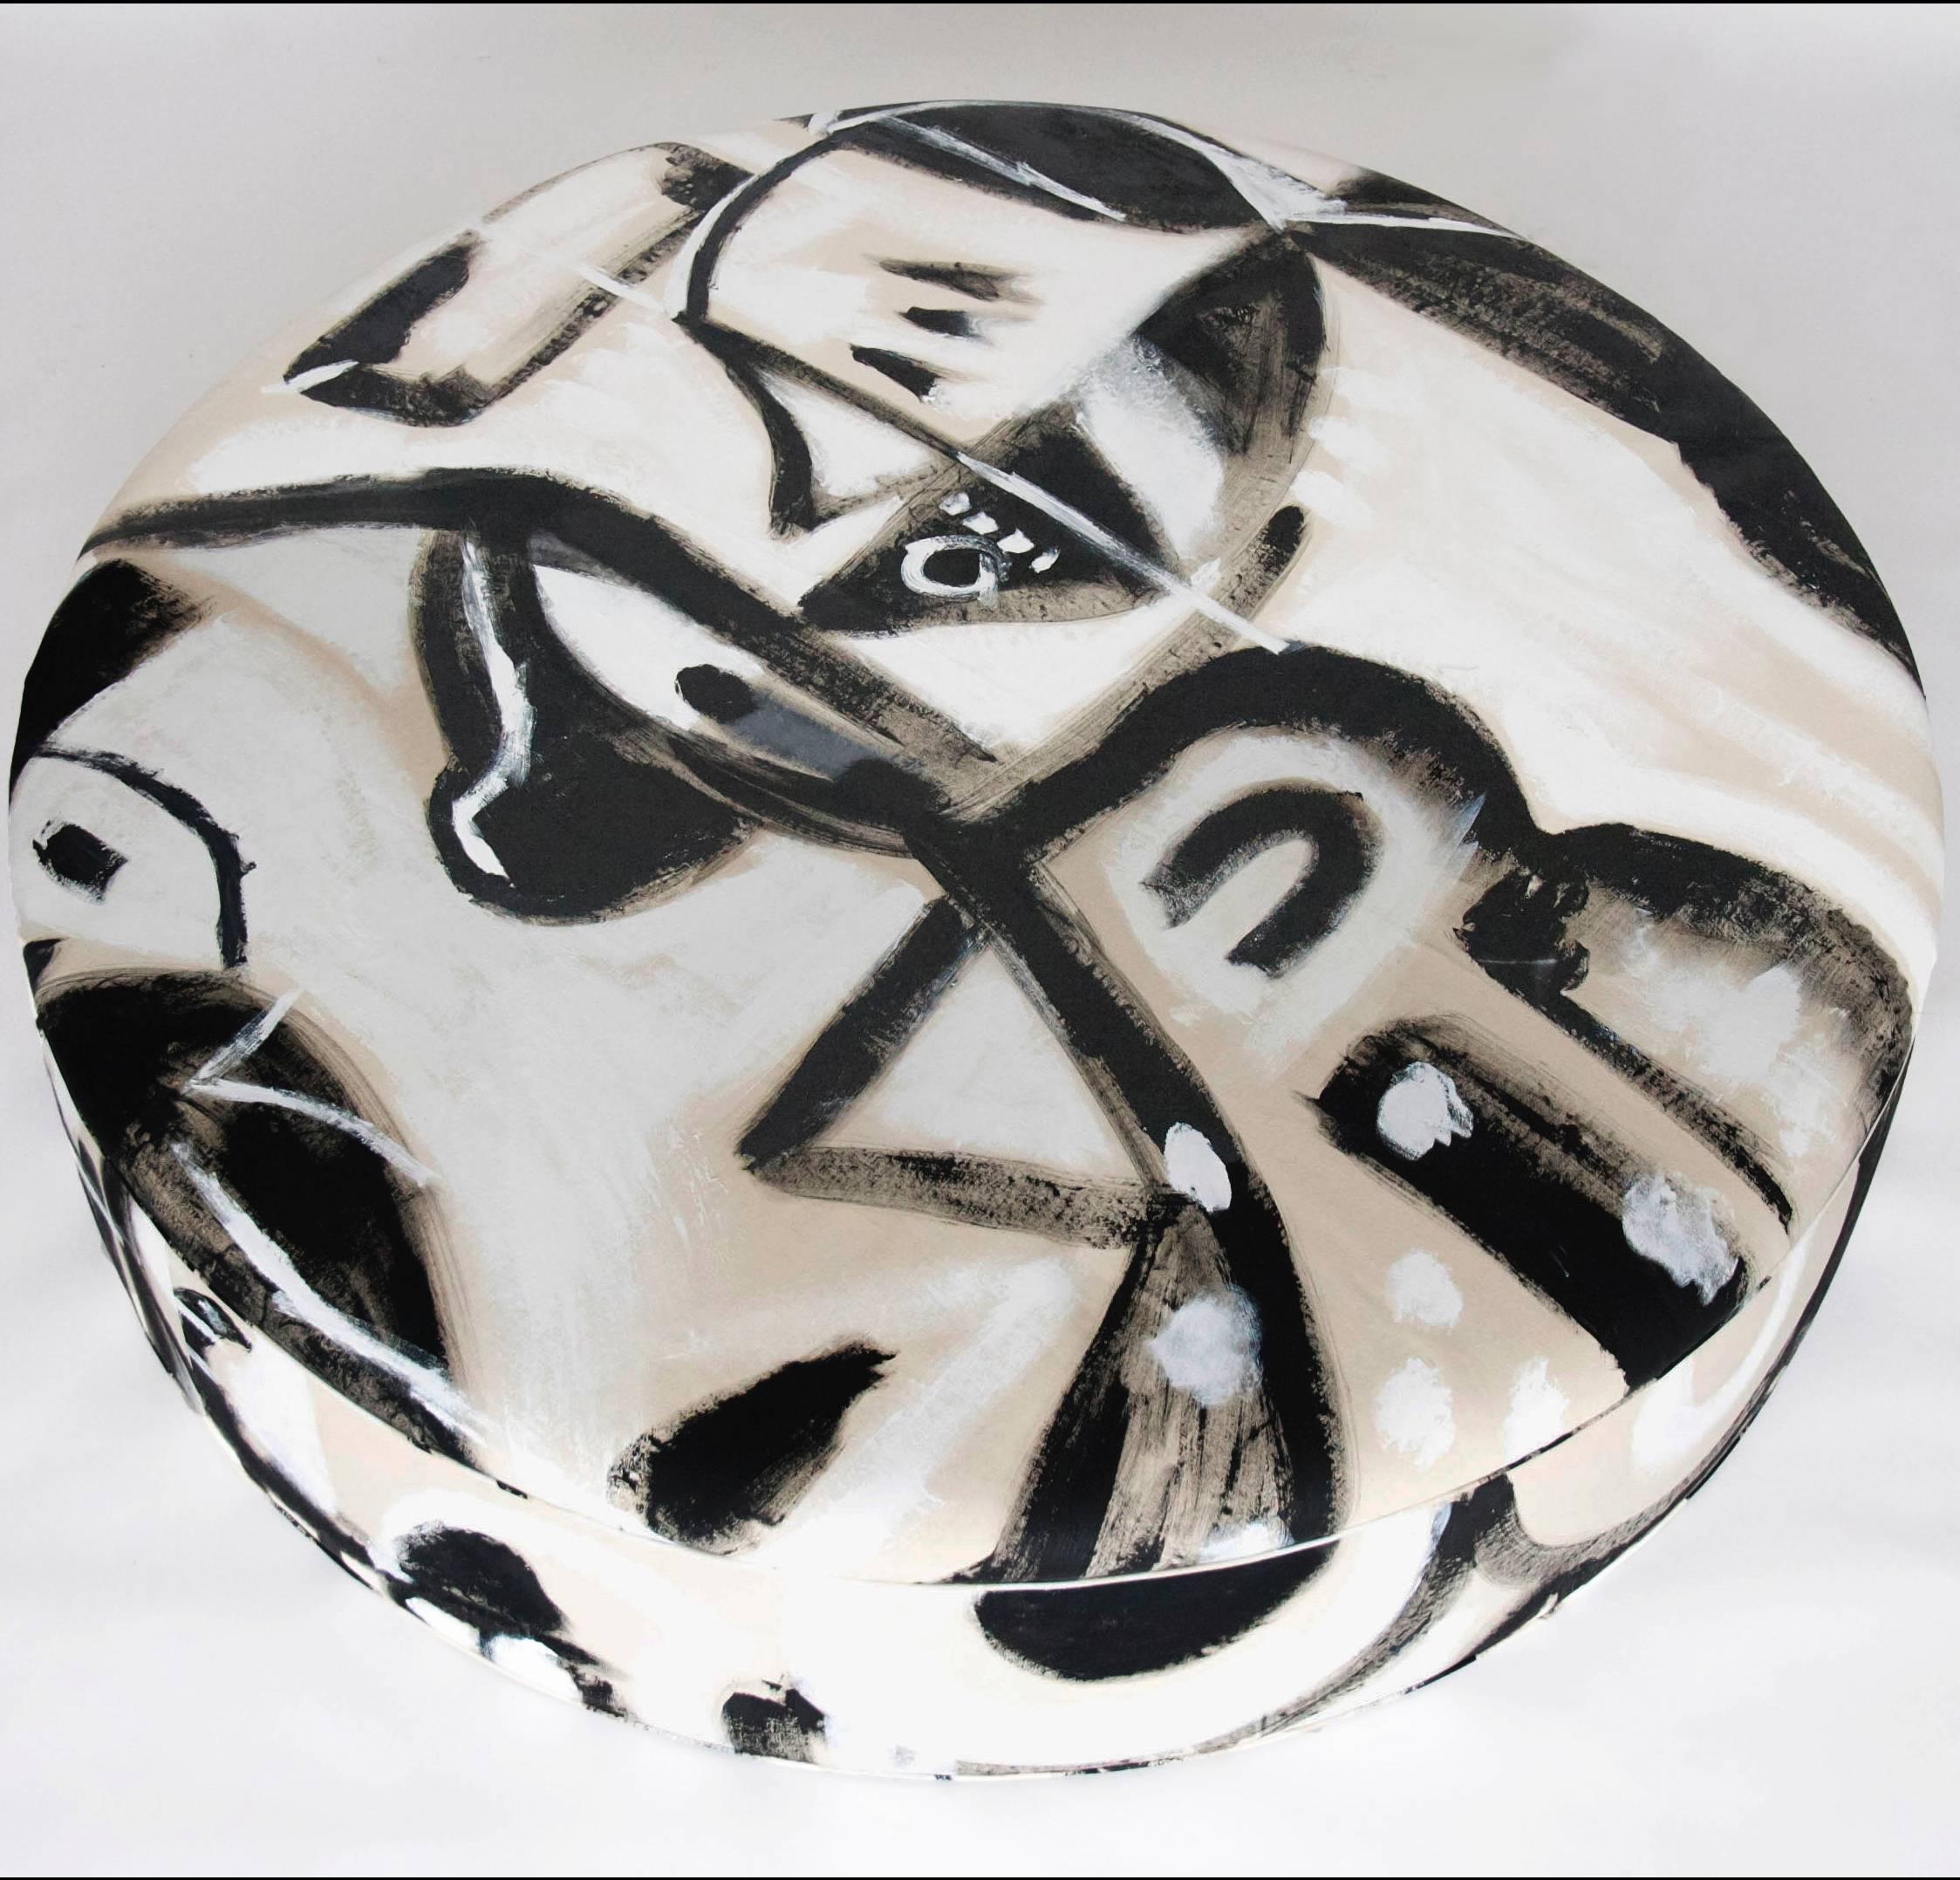 For Fort Makers, Naomi Clark paints vibrant abstract compositions on fabrics that are then made into useable objects. The Hand-Painted Black and White Canvas Circle Seat is large enough for six people to comfortably sit. 

Materials: cotton canvas,